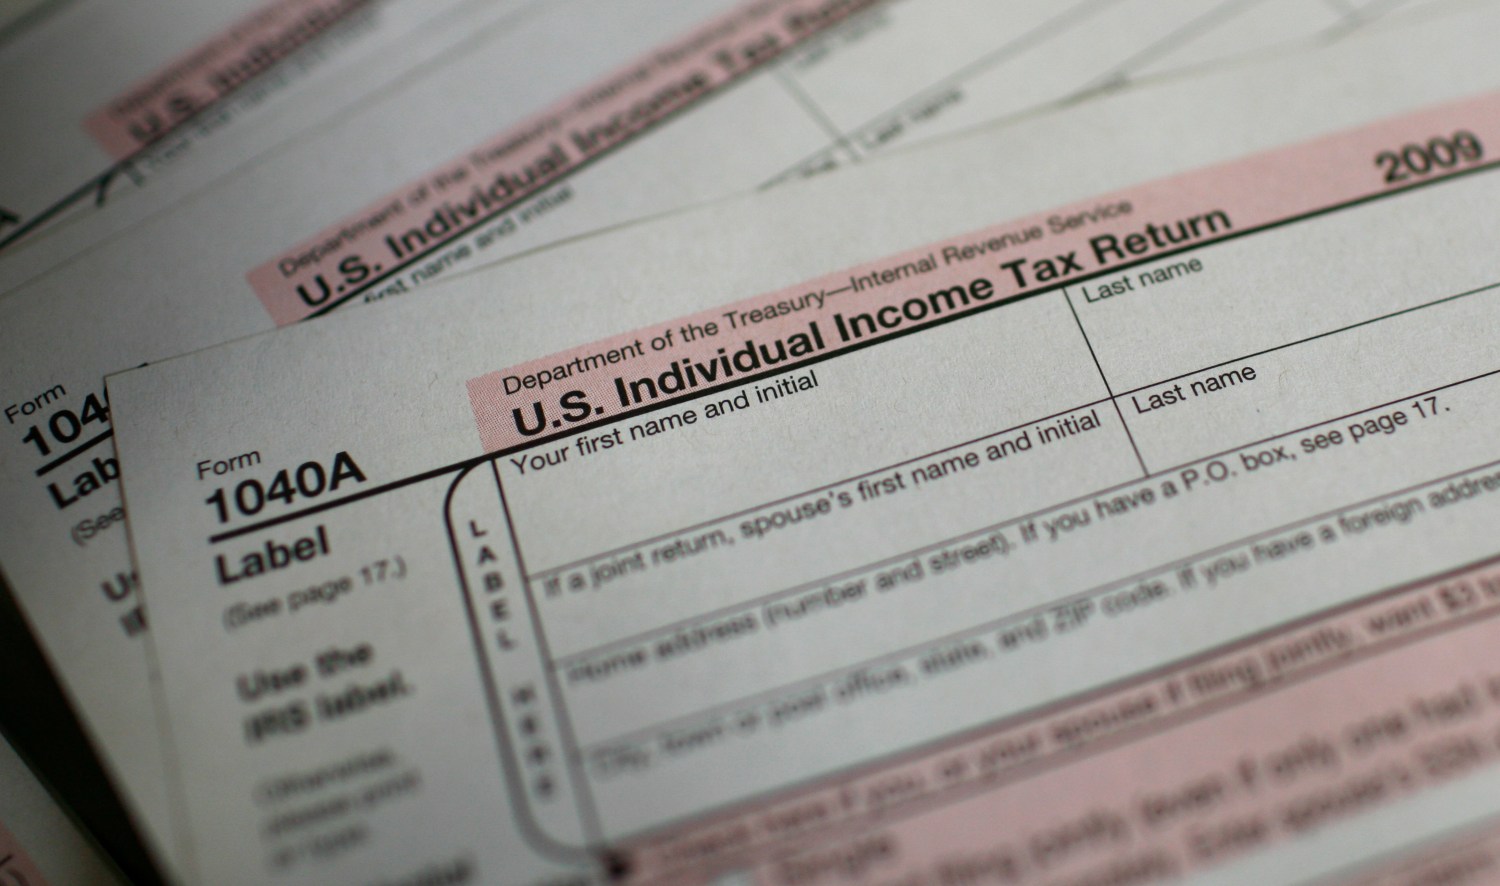 U.S. 1040A Individual Income Tax forms are seen at a U.S. Post office in New York